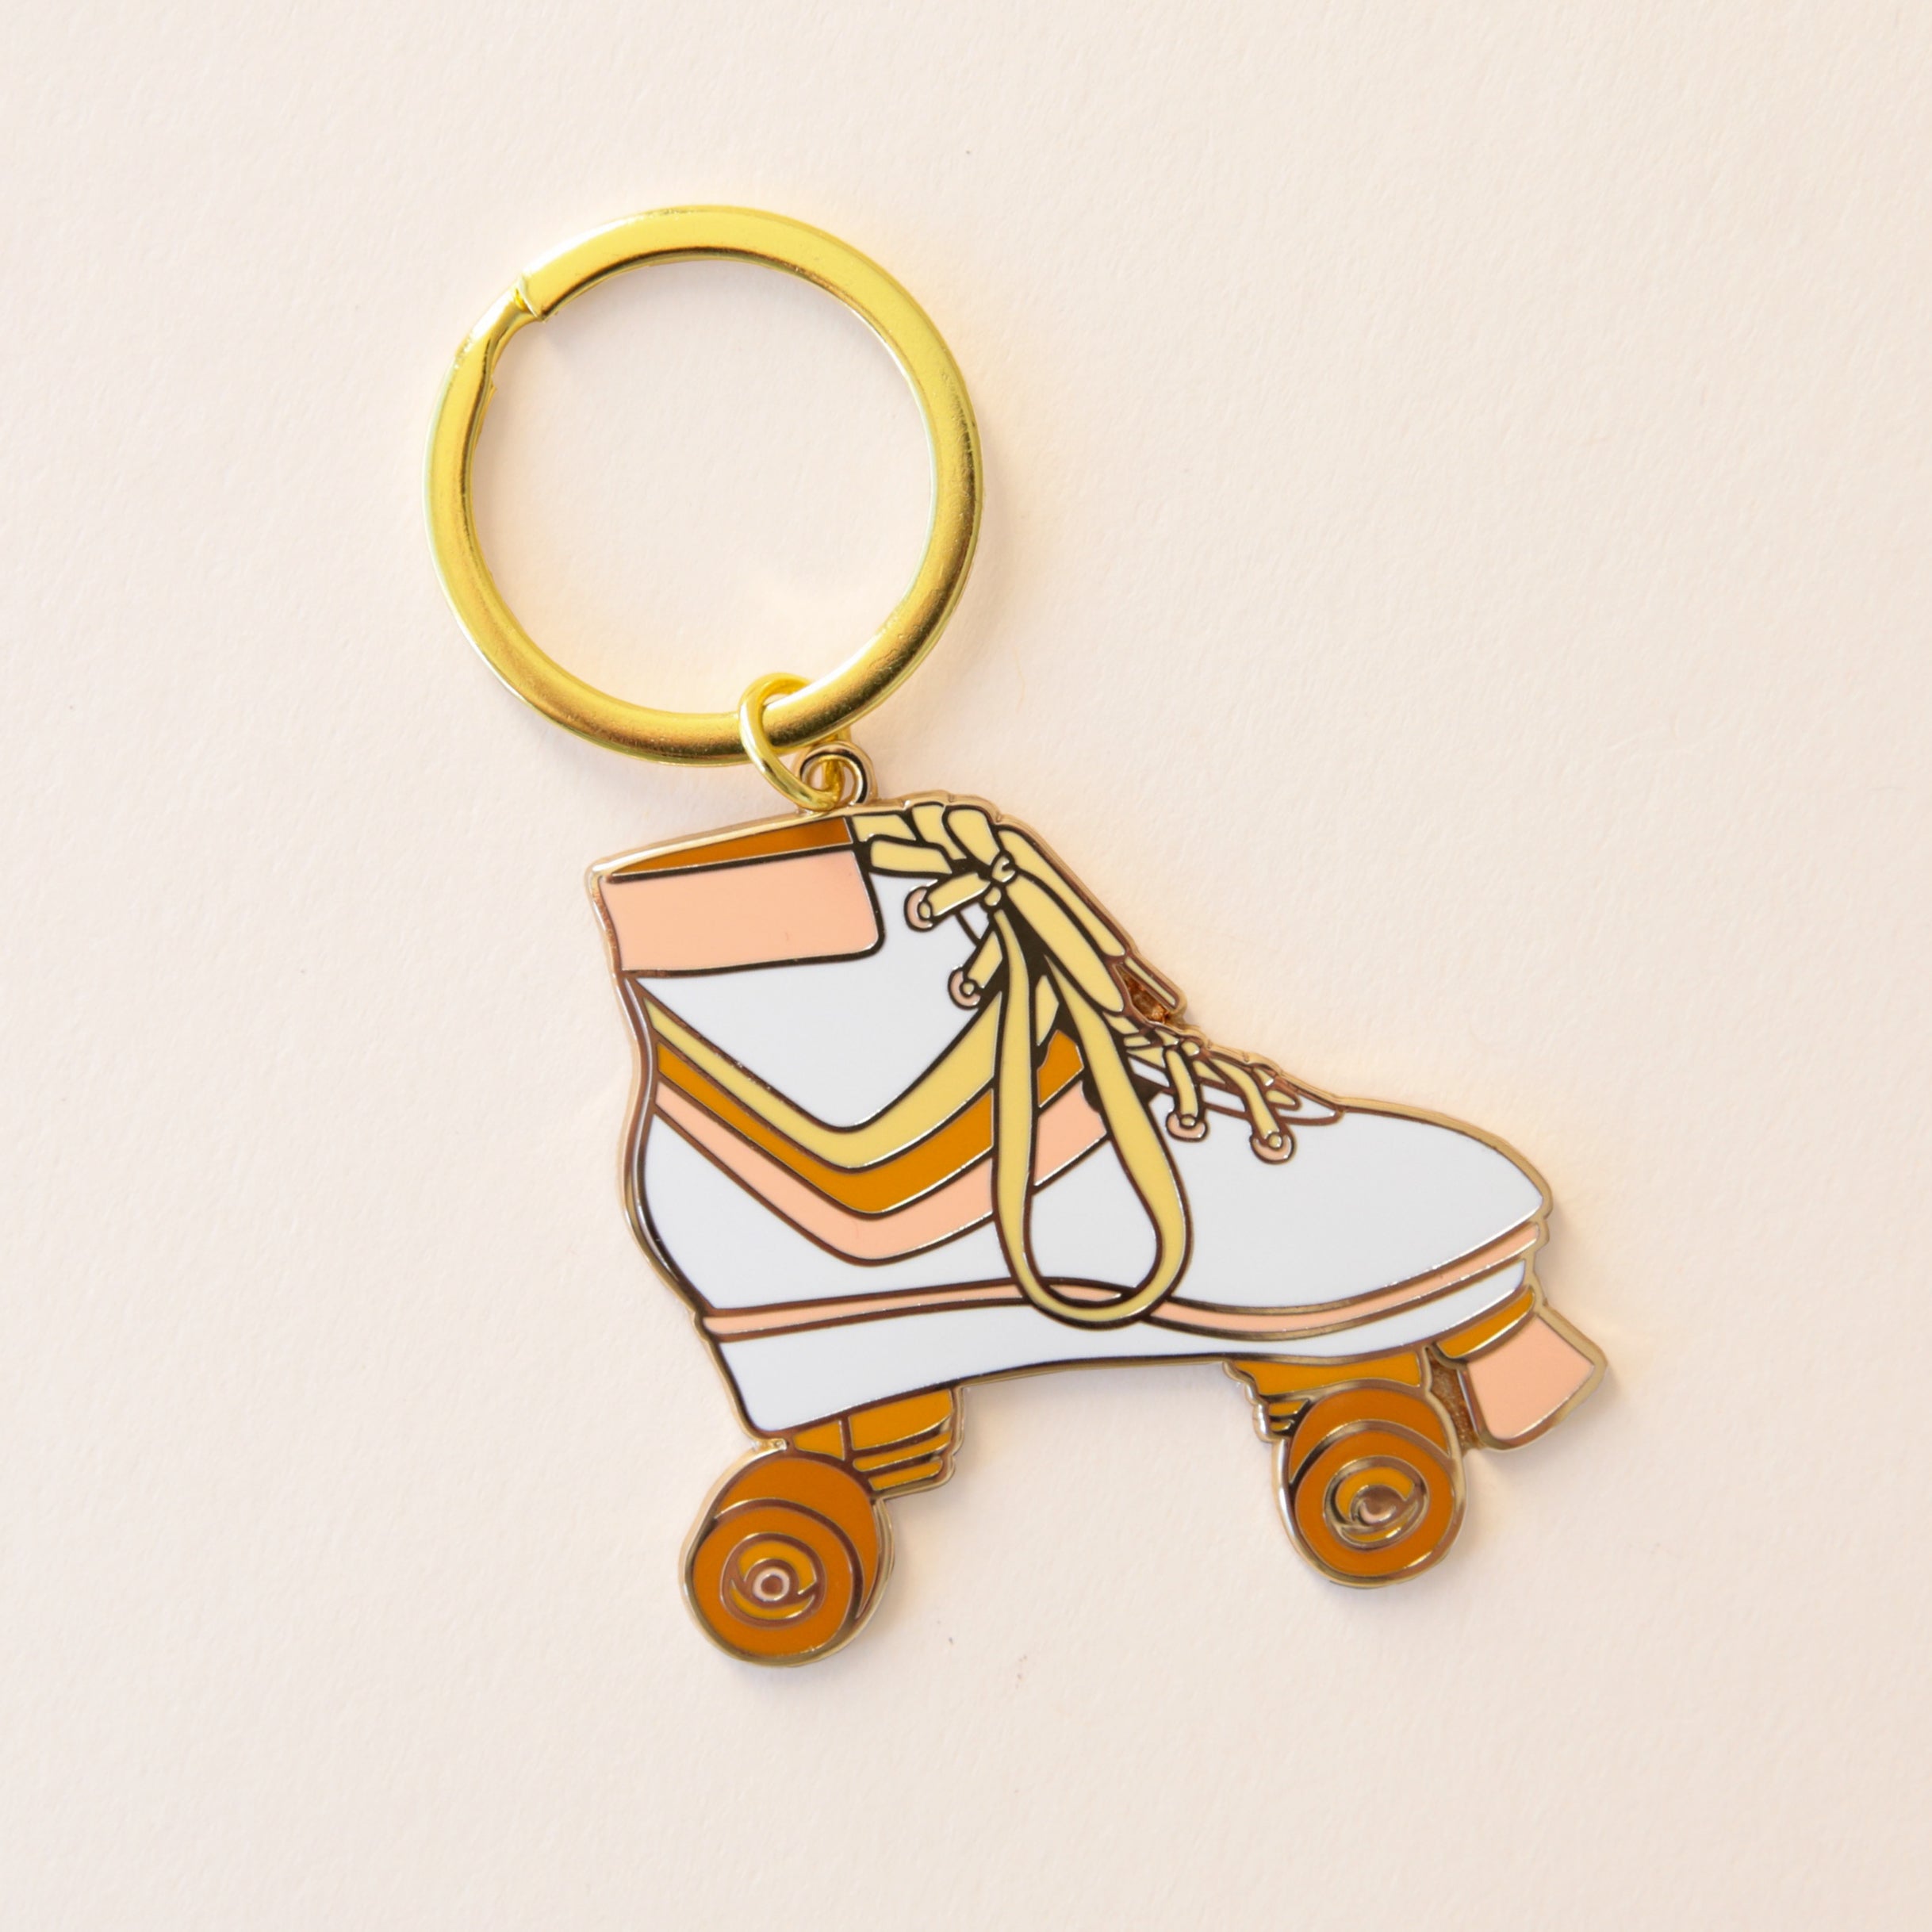 A metal roller skate keychain with orange wheels, and a white boot with pink, orange and yellow stripes in the center along with yellow shoelaces and a gold  keychain hoop.